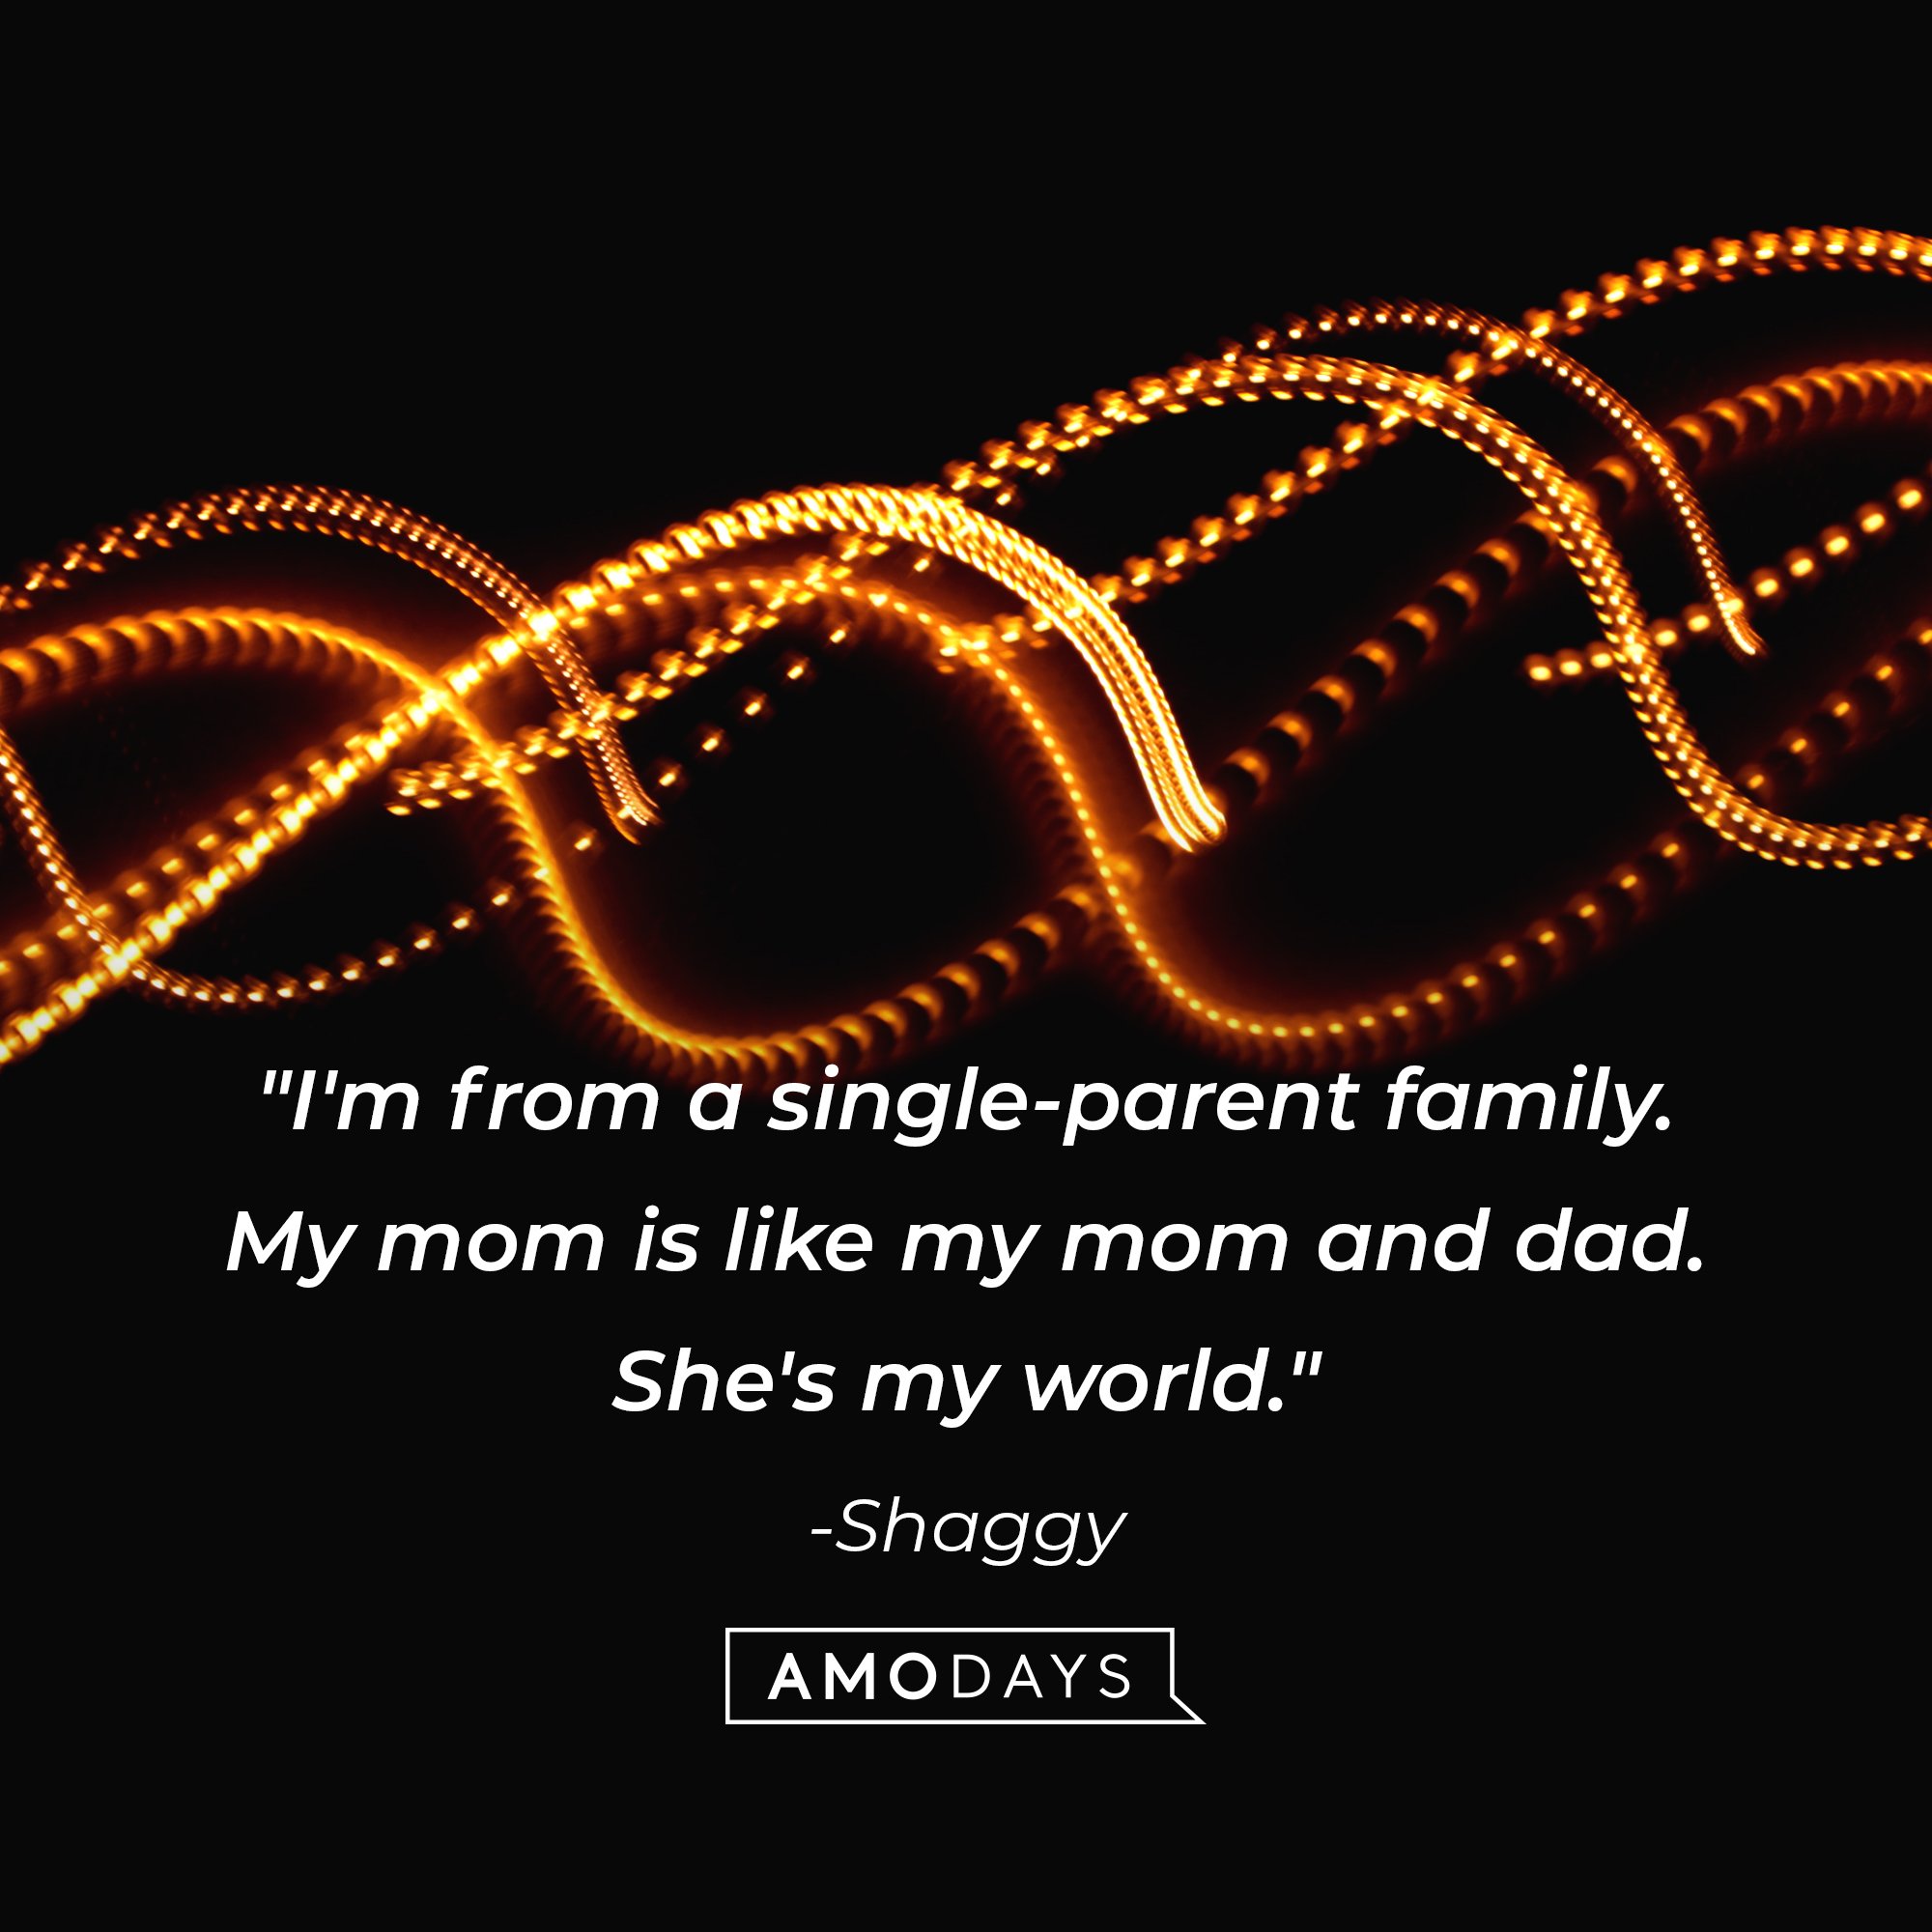 Shaggy's quote: "I'm from a single-parent family. My mom is like my mom and dad. She's my world." | Image: AmoDays